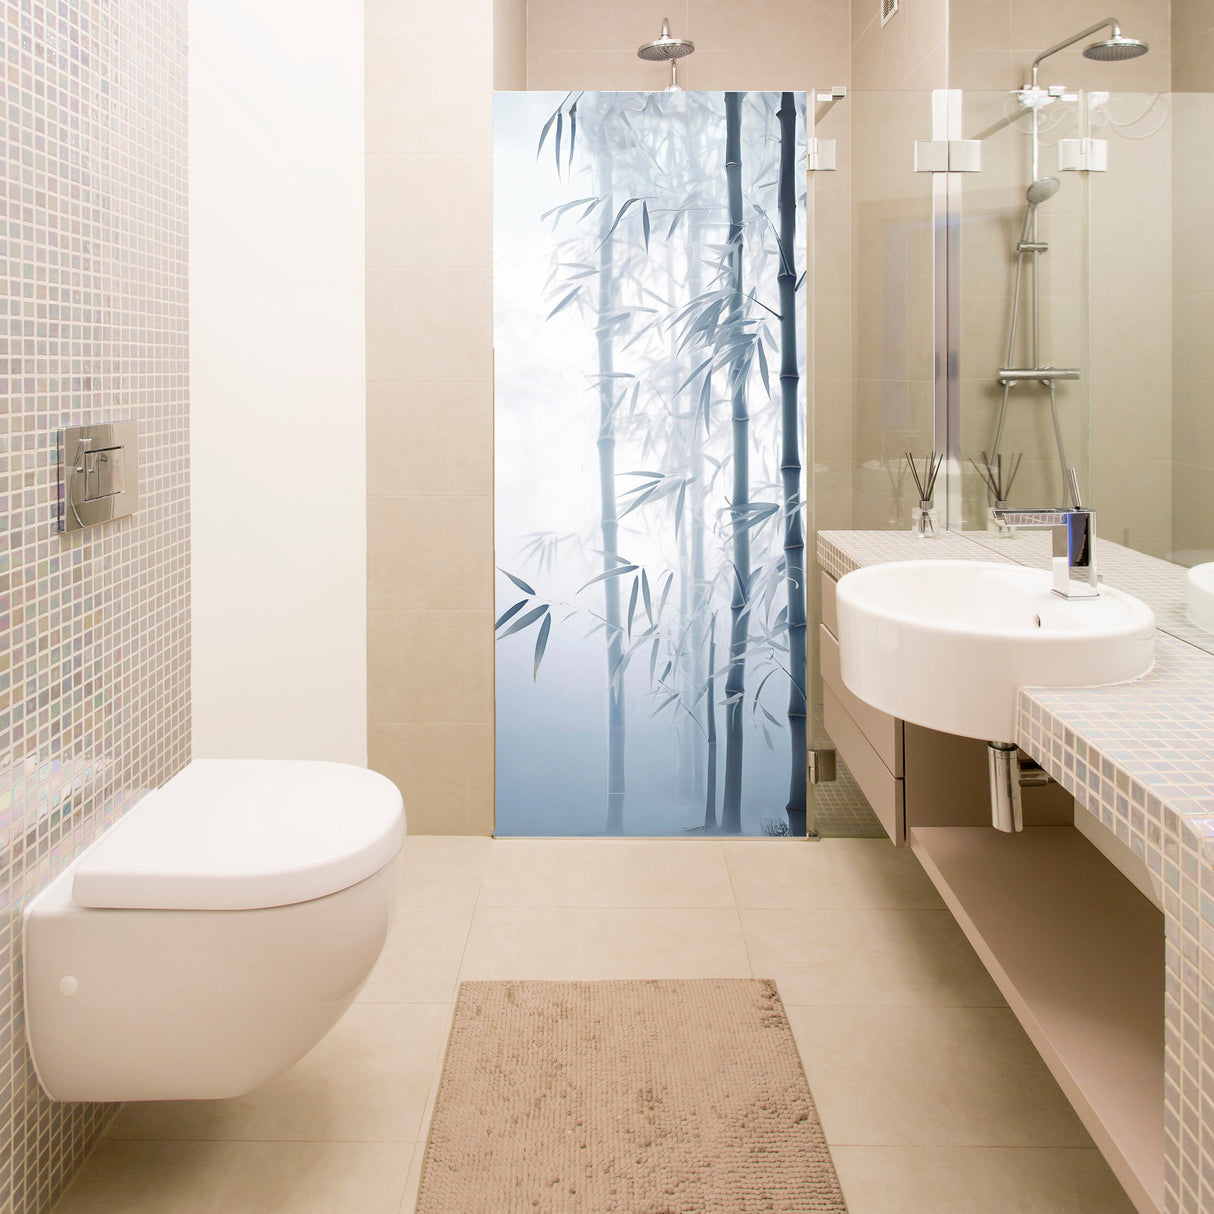 Tranquil Bamboo Forest Shower Glass Door Sticker - Ethereal Misty Reed Decal for Bathroom Privacy - White Blurry Foggy Cane Plants